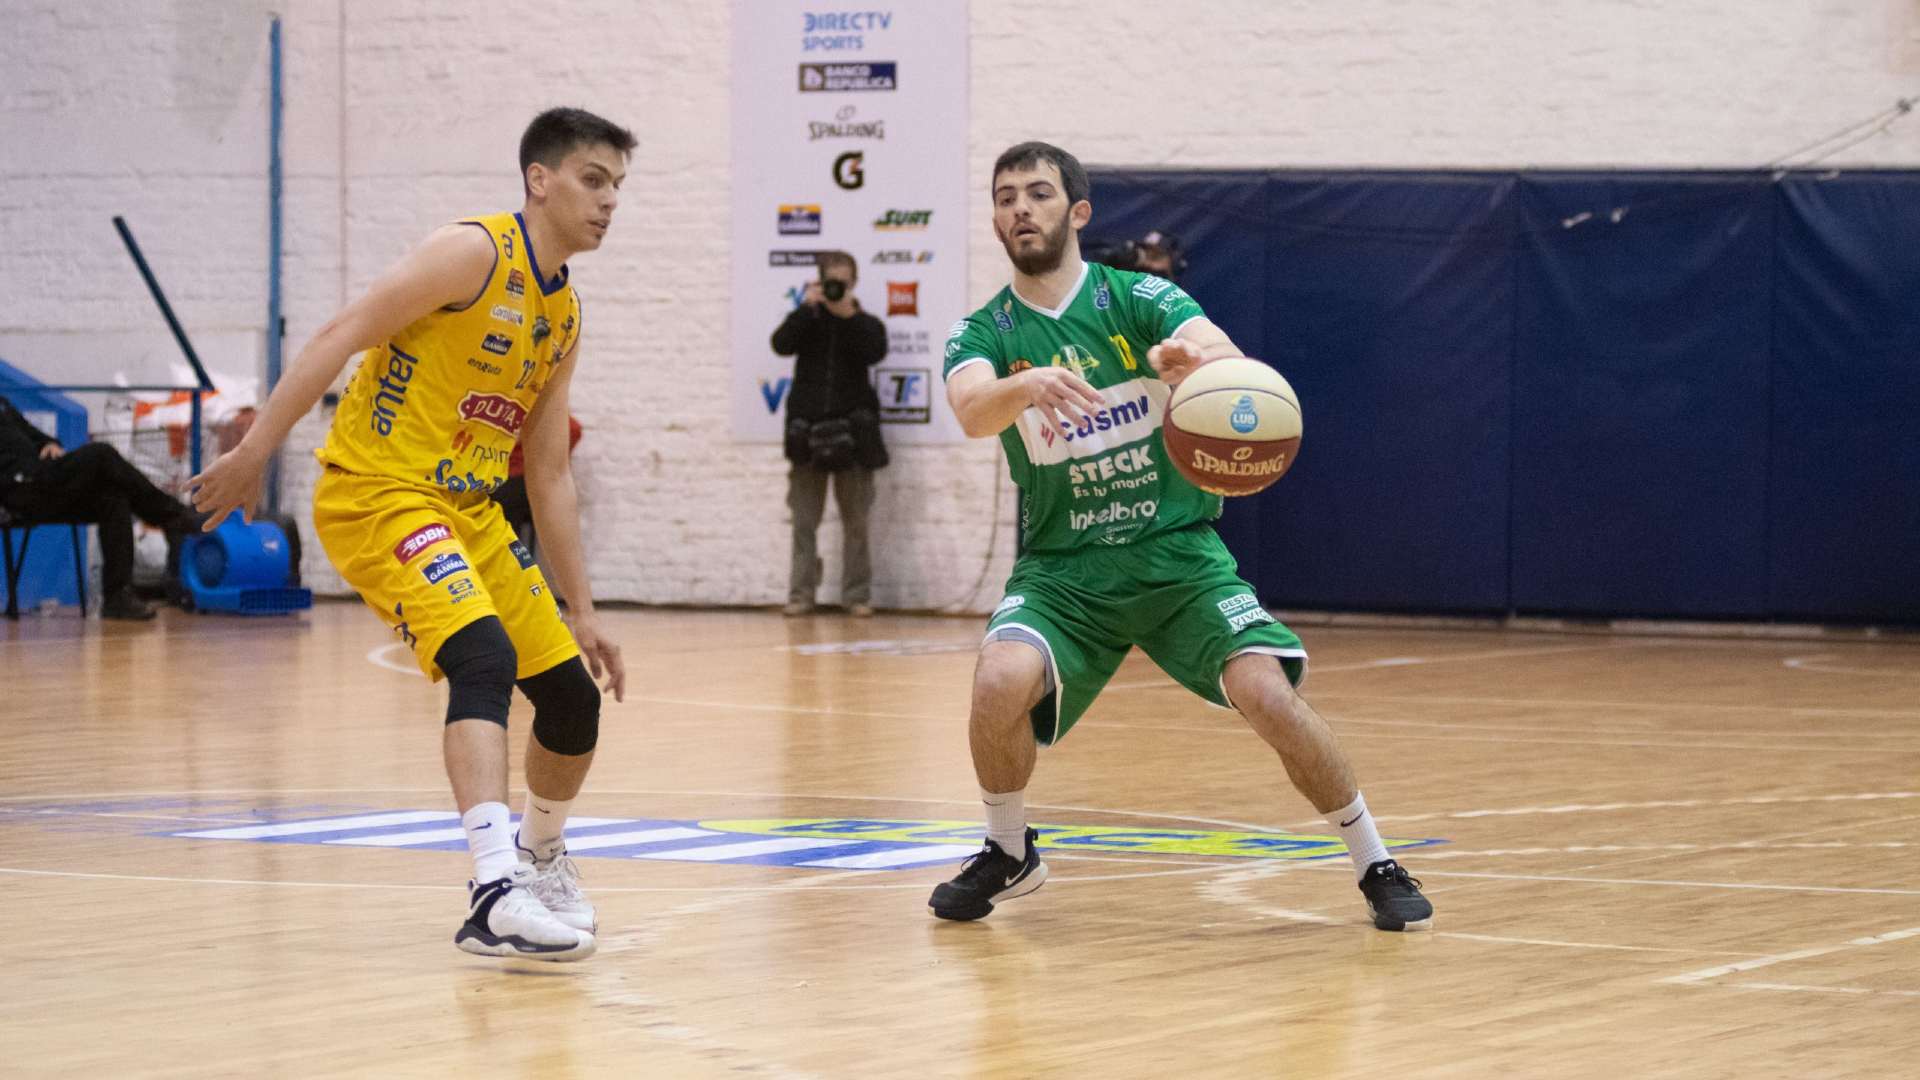 The Unión Atlética vs Colón Basket El Metro Uruguay match will be held on September 13, 8:45 PM (Uruguay Time) and September 14, 5:15 AM (Indian Time).